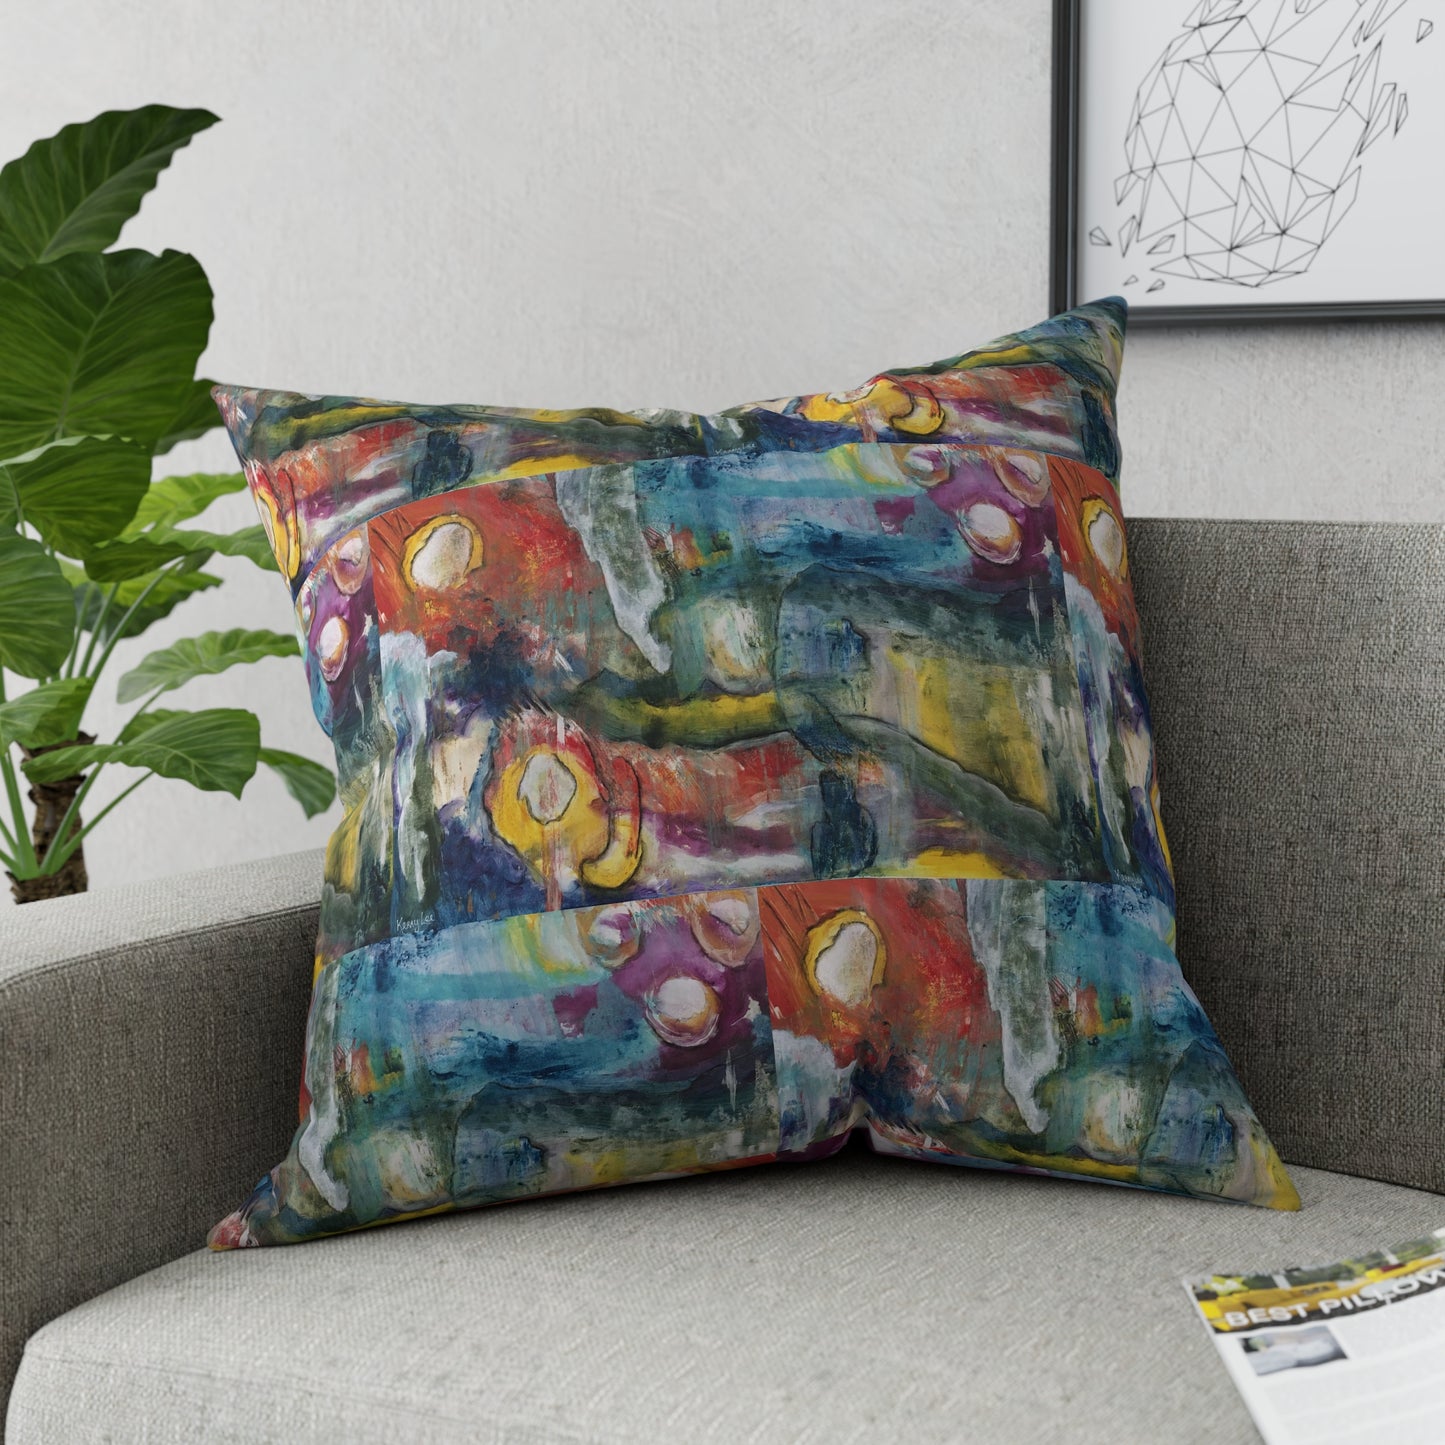 Soft Broadcloth Pillow: The Dream